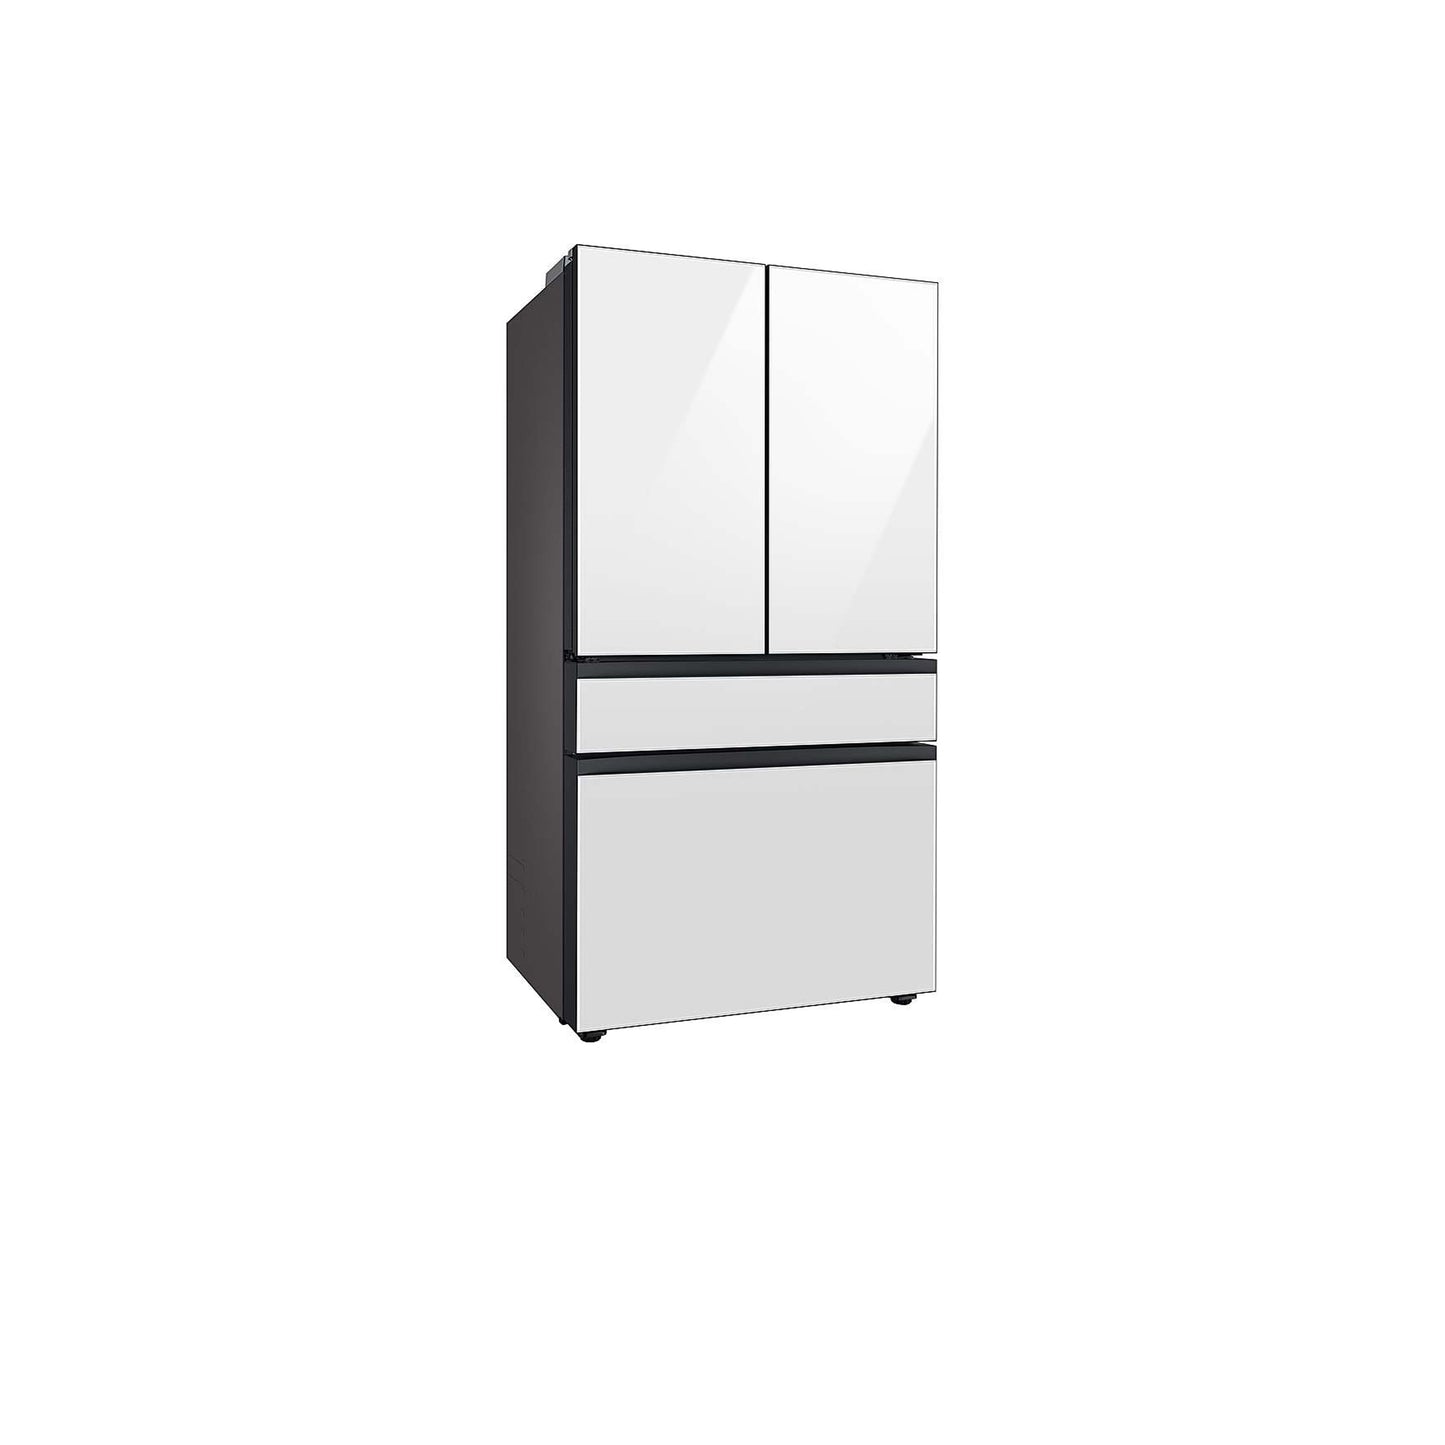 Bespoke 4-Door French Door Refrigerator (29 cu. ft.) – with Family Hub™ Panel in White Glass – (with Customizable Door Panel Colors) in White Glass